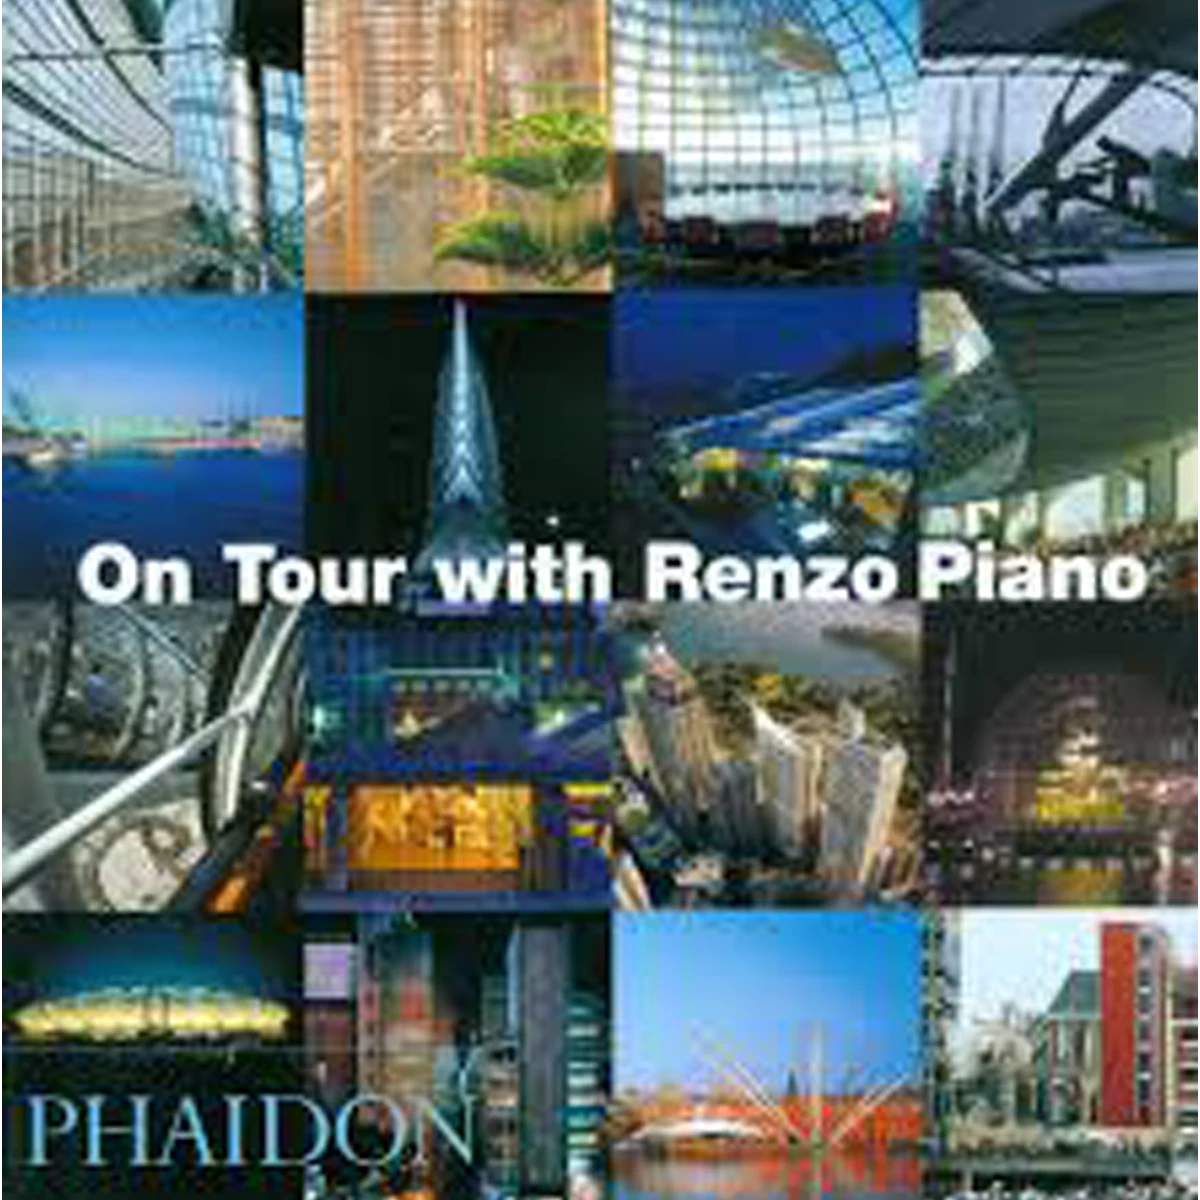 On Tour with Renzo Piano